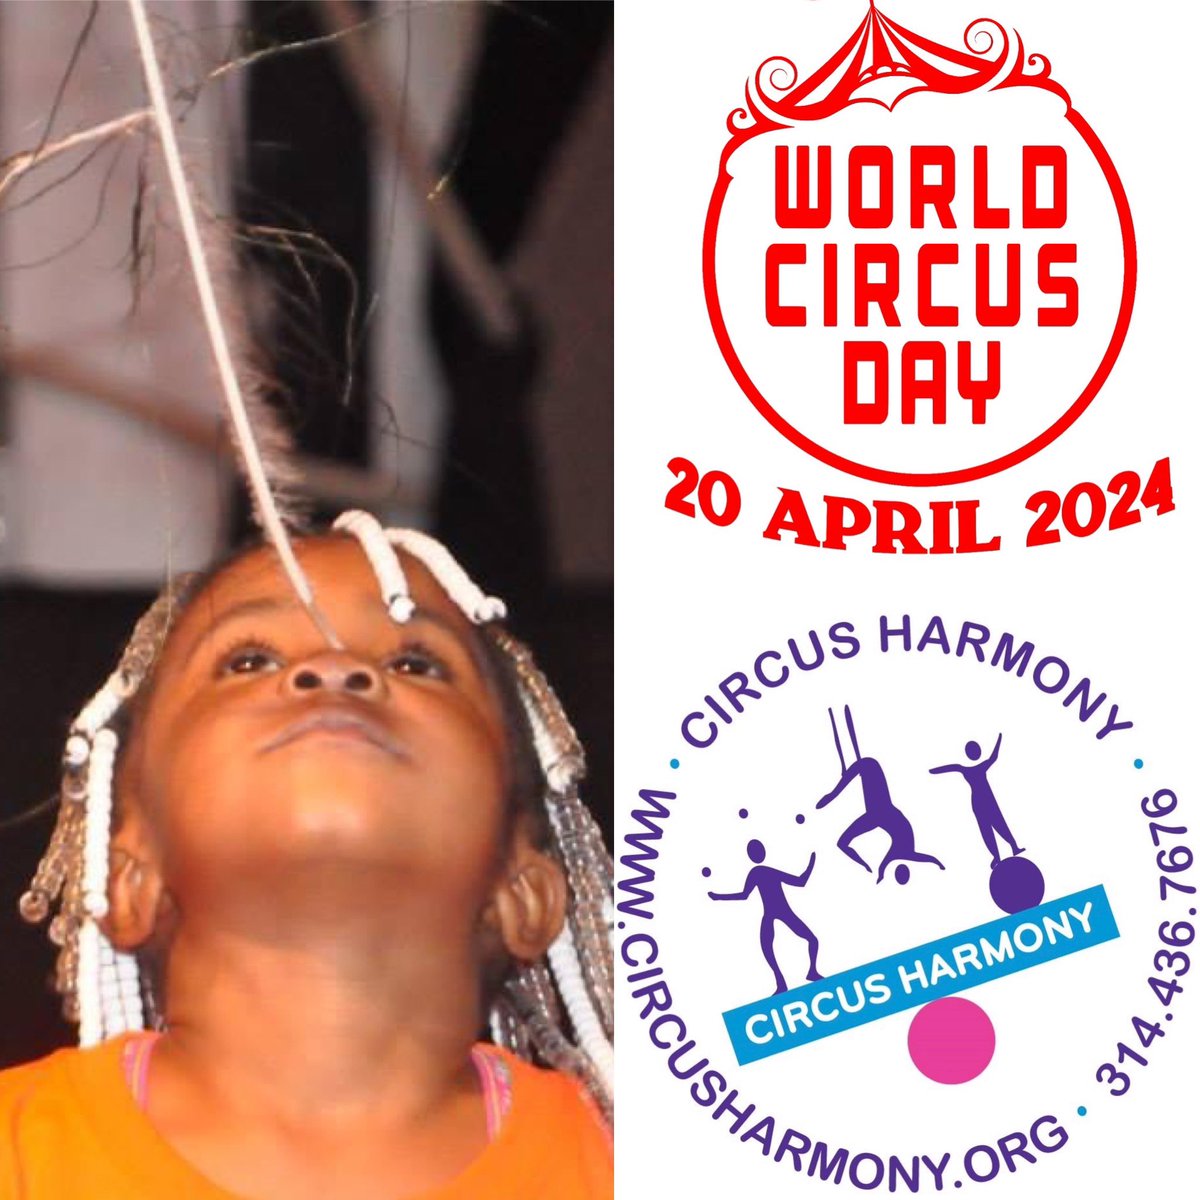 Saturday, April 20, is World Circus Day! Since the world seems so out of balance and circus people are masters of balance, @CircusHarmony is offering a free balancing lesson and giveaway at both our 1 and 3 pm shows at @CityMuseum on World Circus Day 2024! Come celebrate with us!